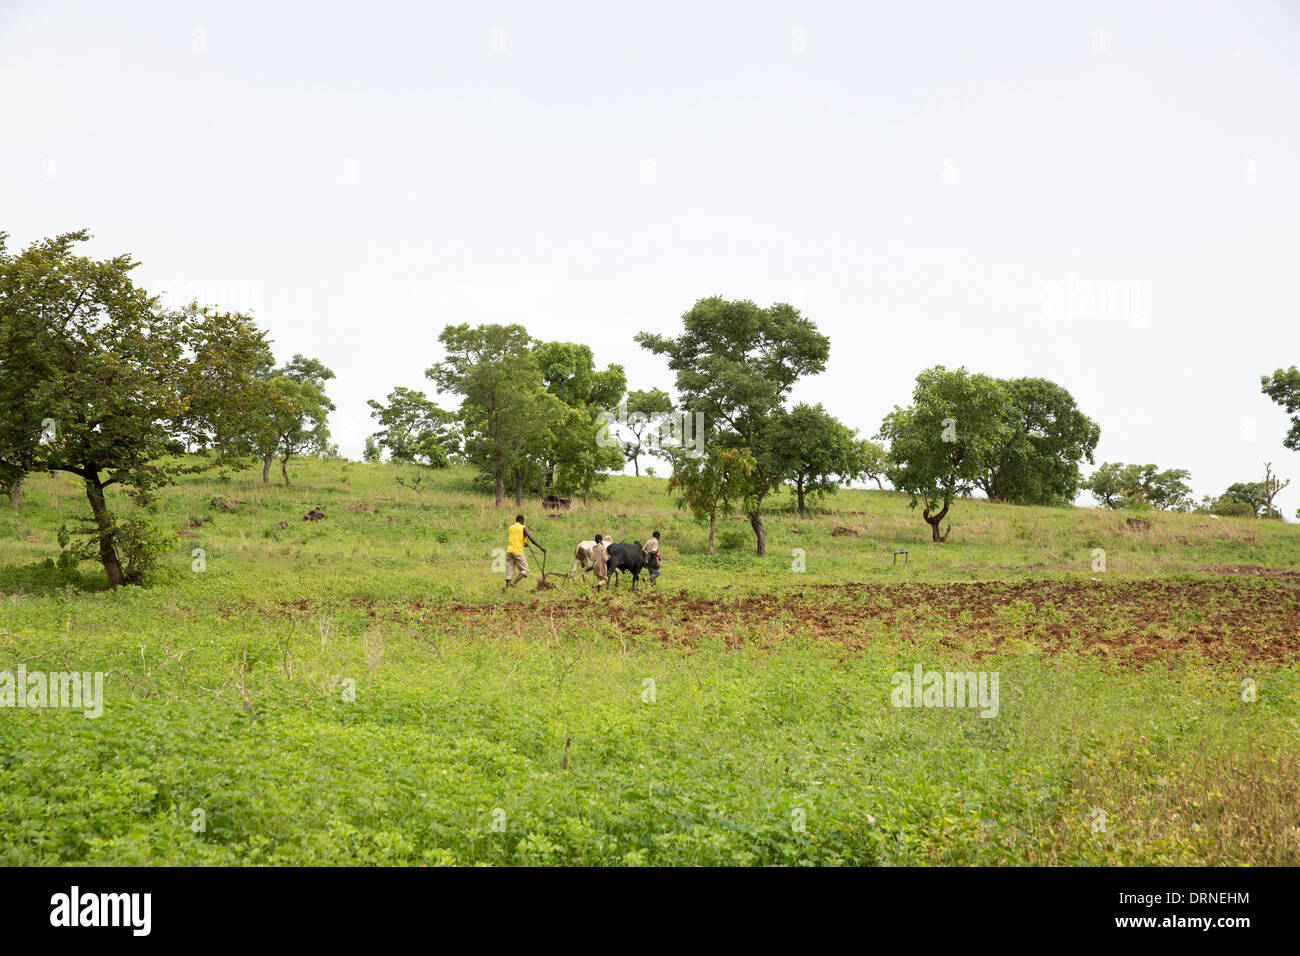 young boys ploughing field with oxen in rural Burkina Faso, Africa Stock Photo